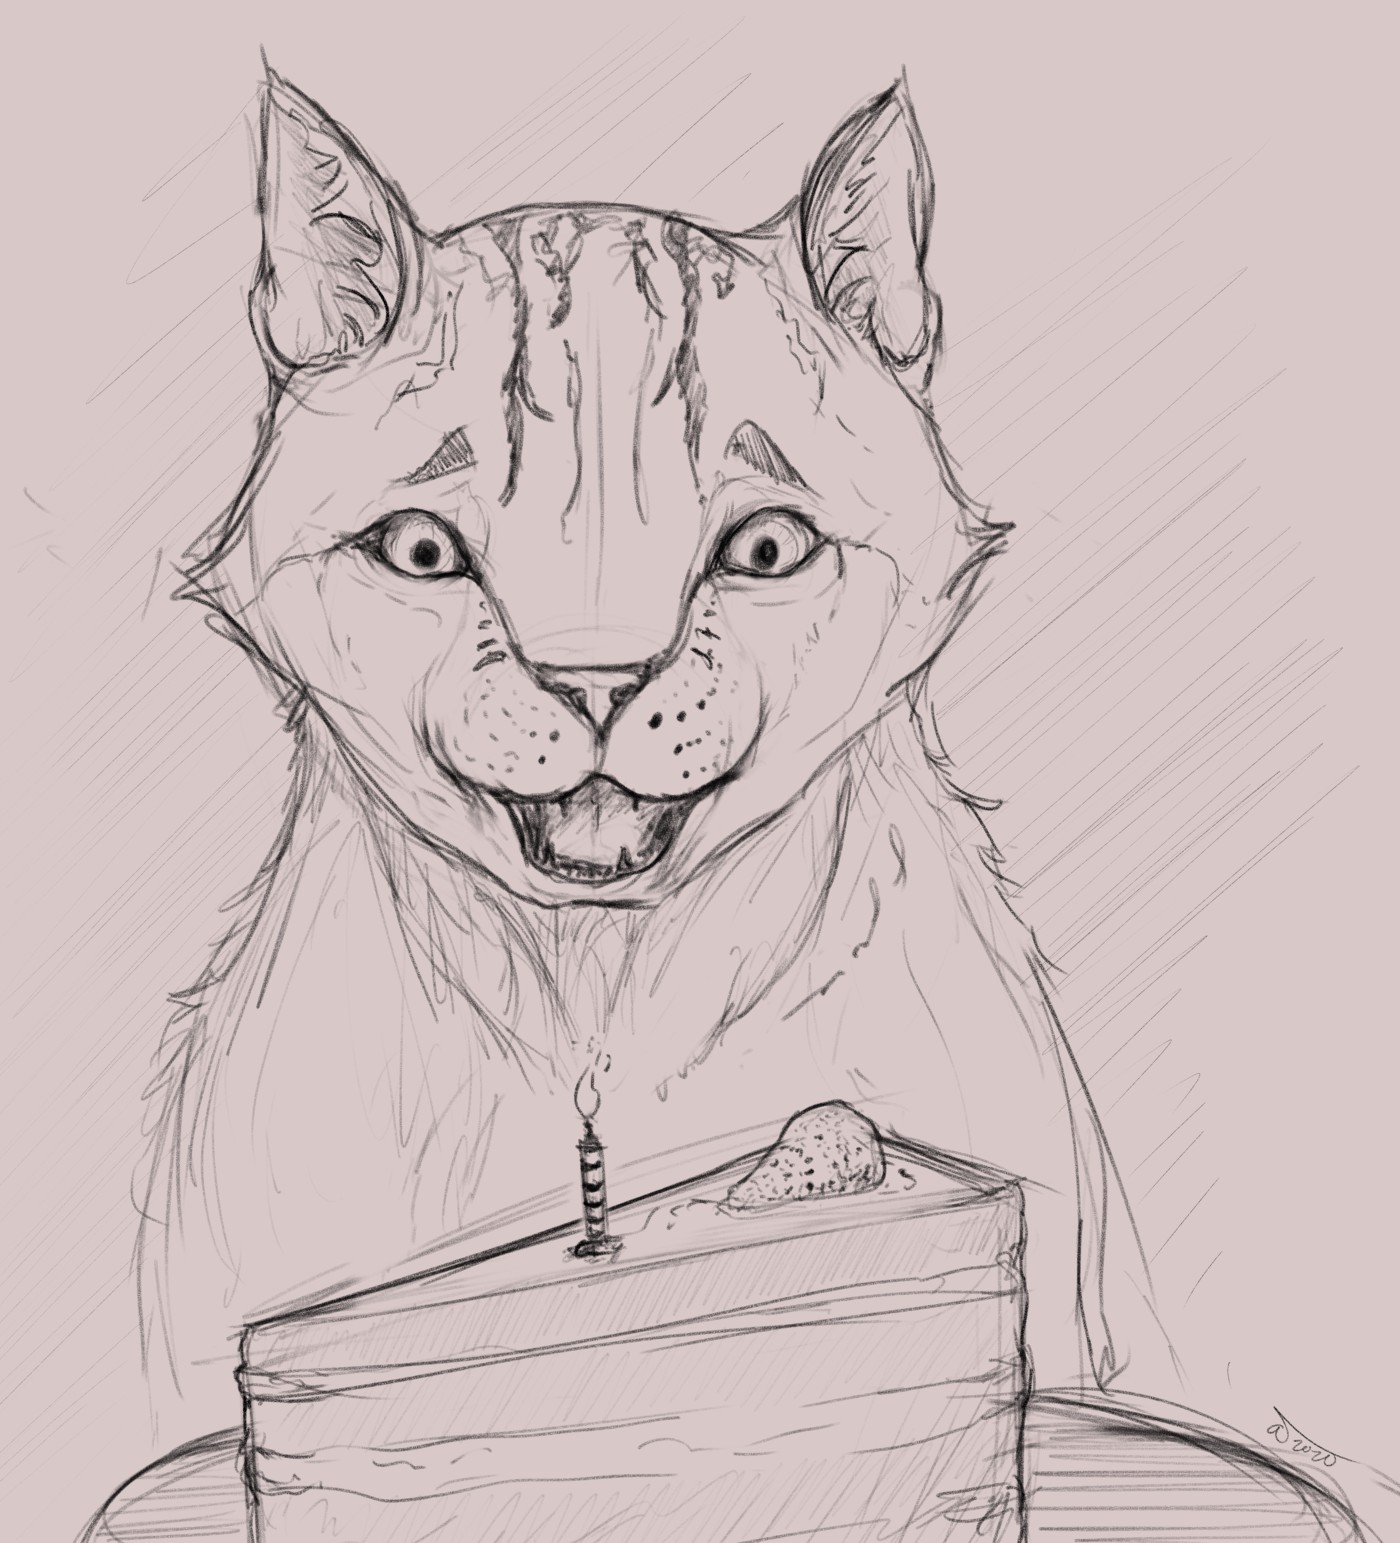 Sketch of a cat with a cake